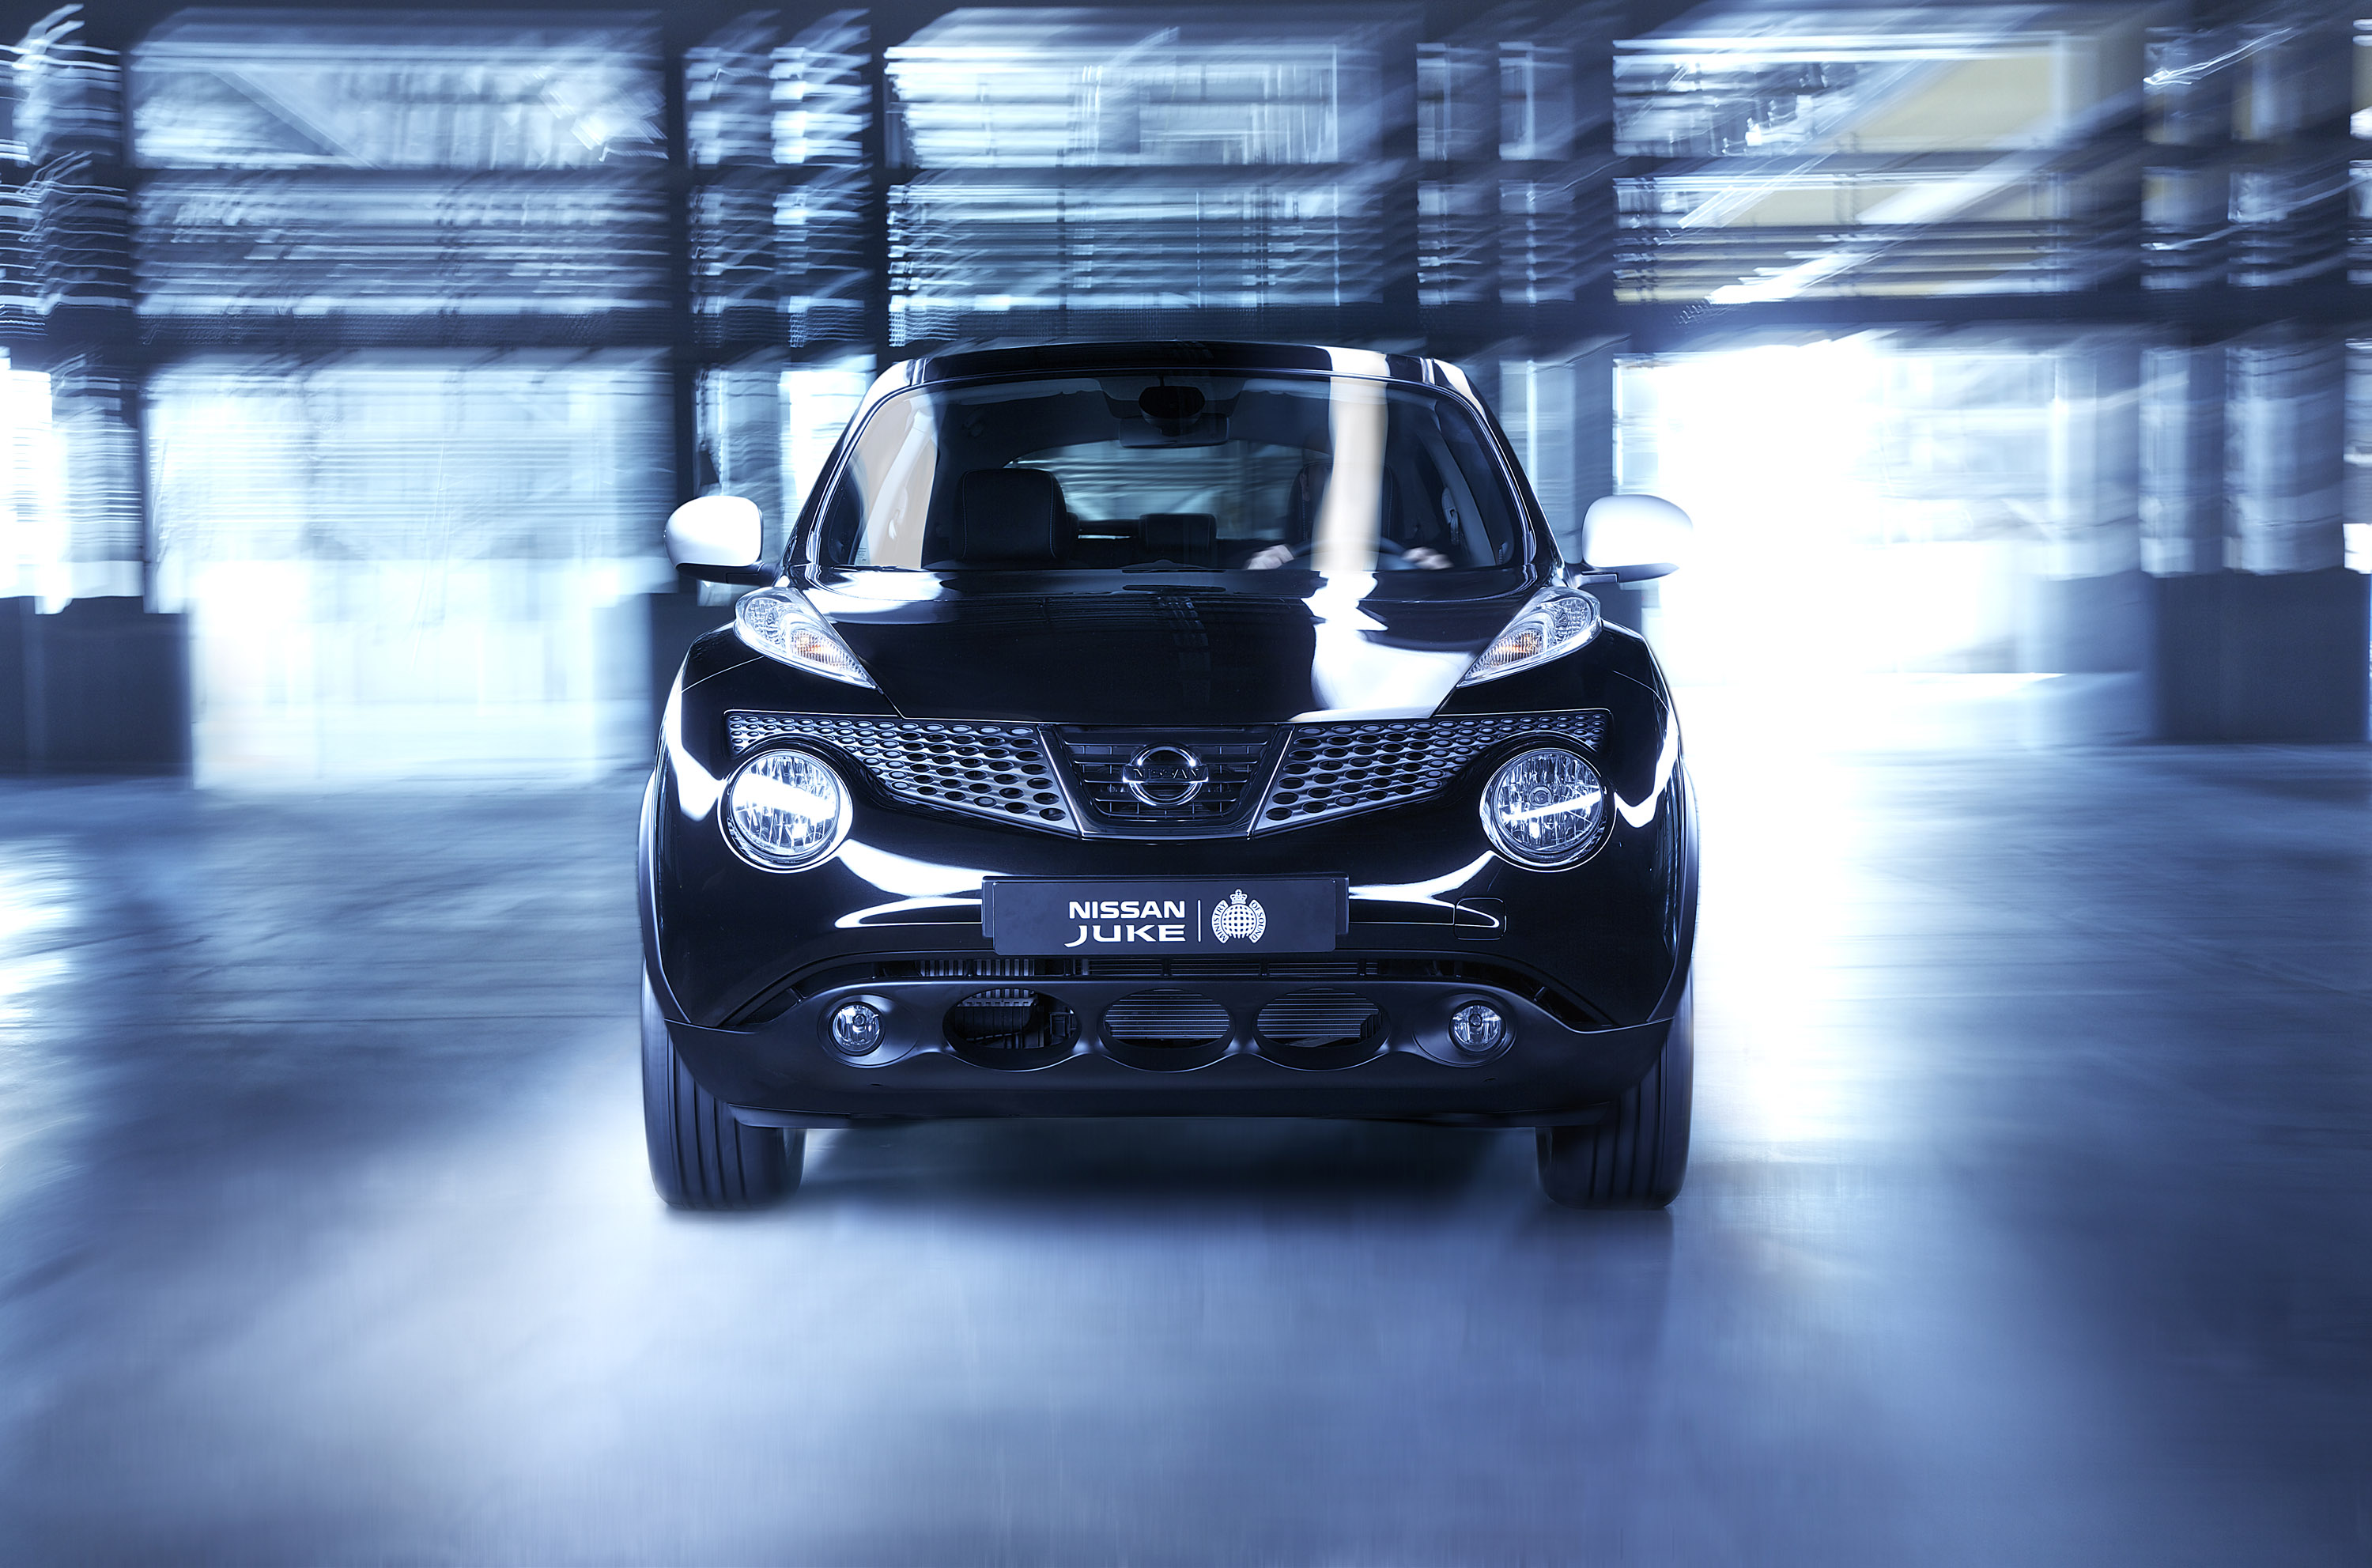 Nissan Juke Ministry of Sound Limited Edition photo #2